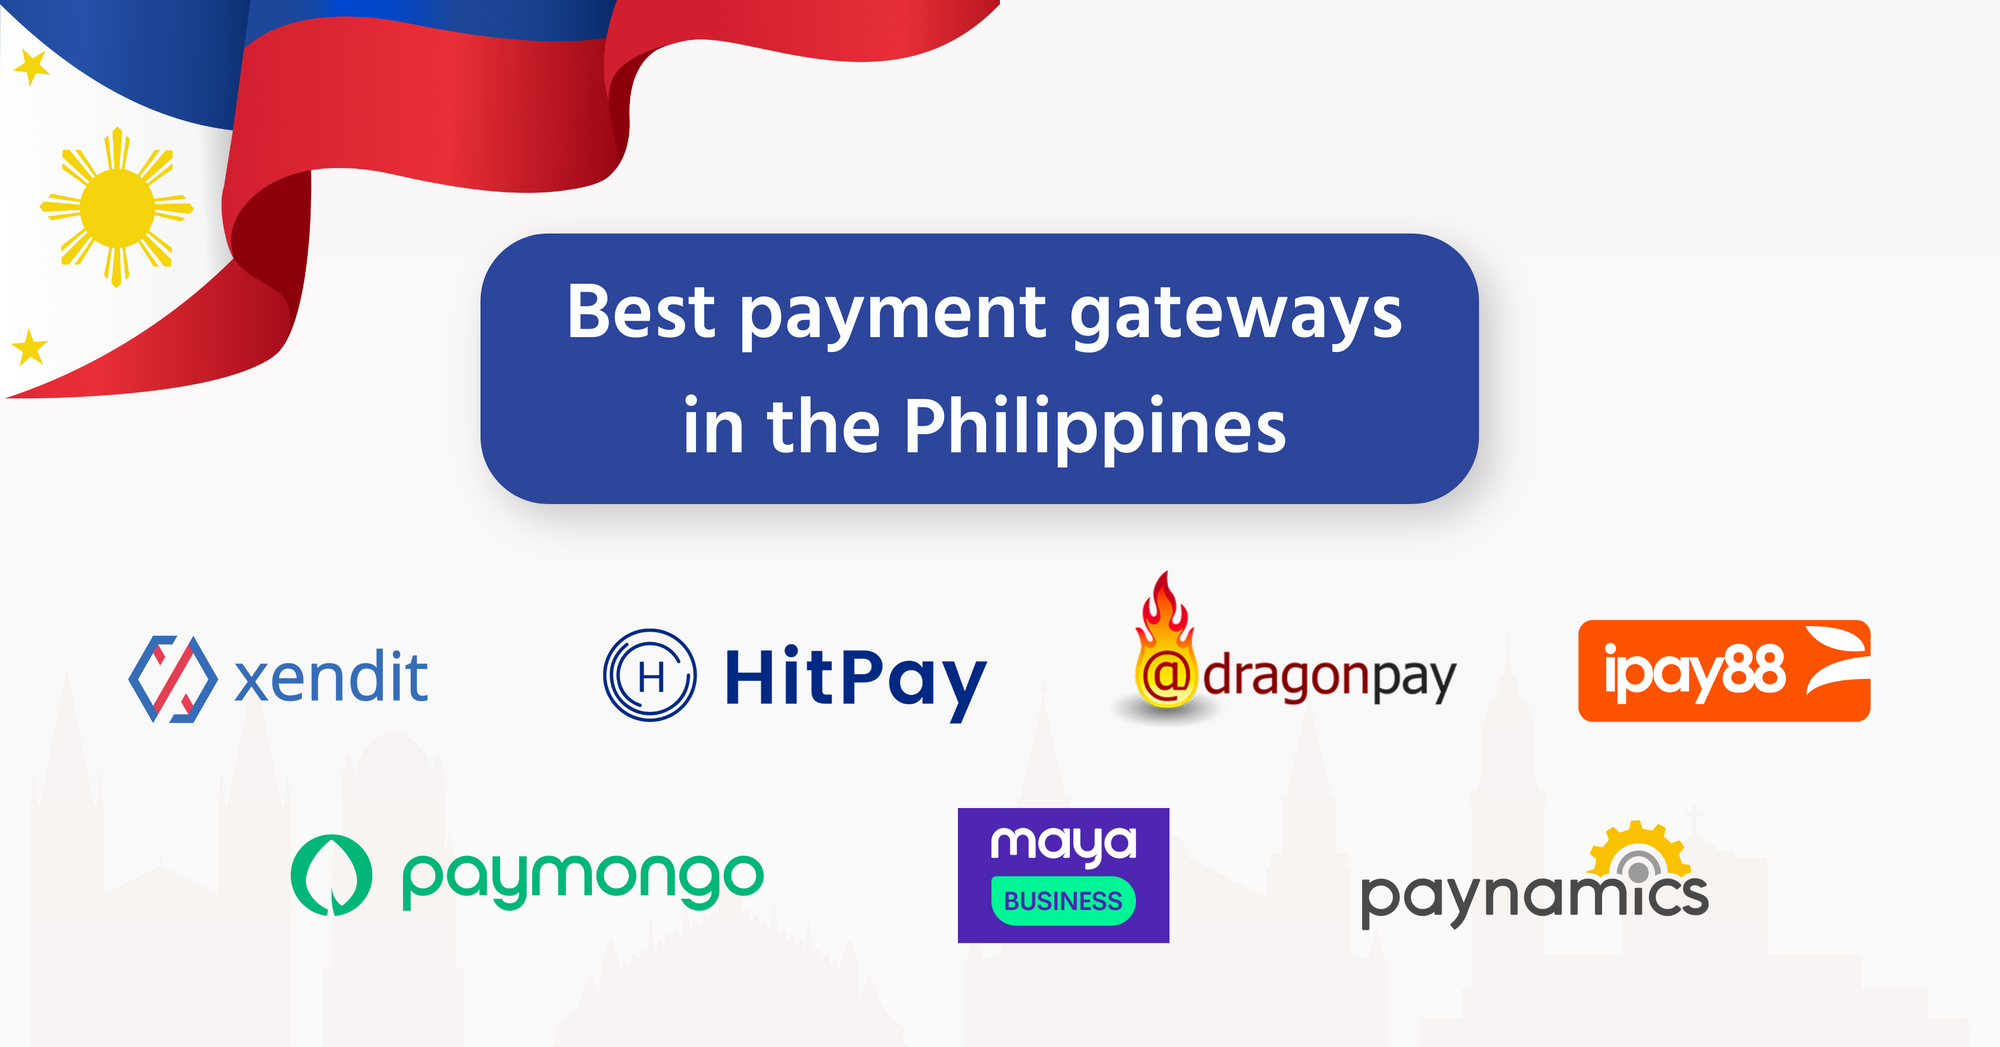 Best Payment Gateway in the Philippines Comparison (2023) – PayMongo vs Xendit, iPay88, HitPay, Maya Business, Paynamics, and Dragonpay